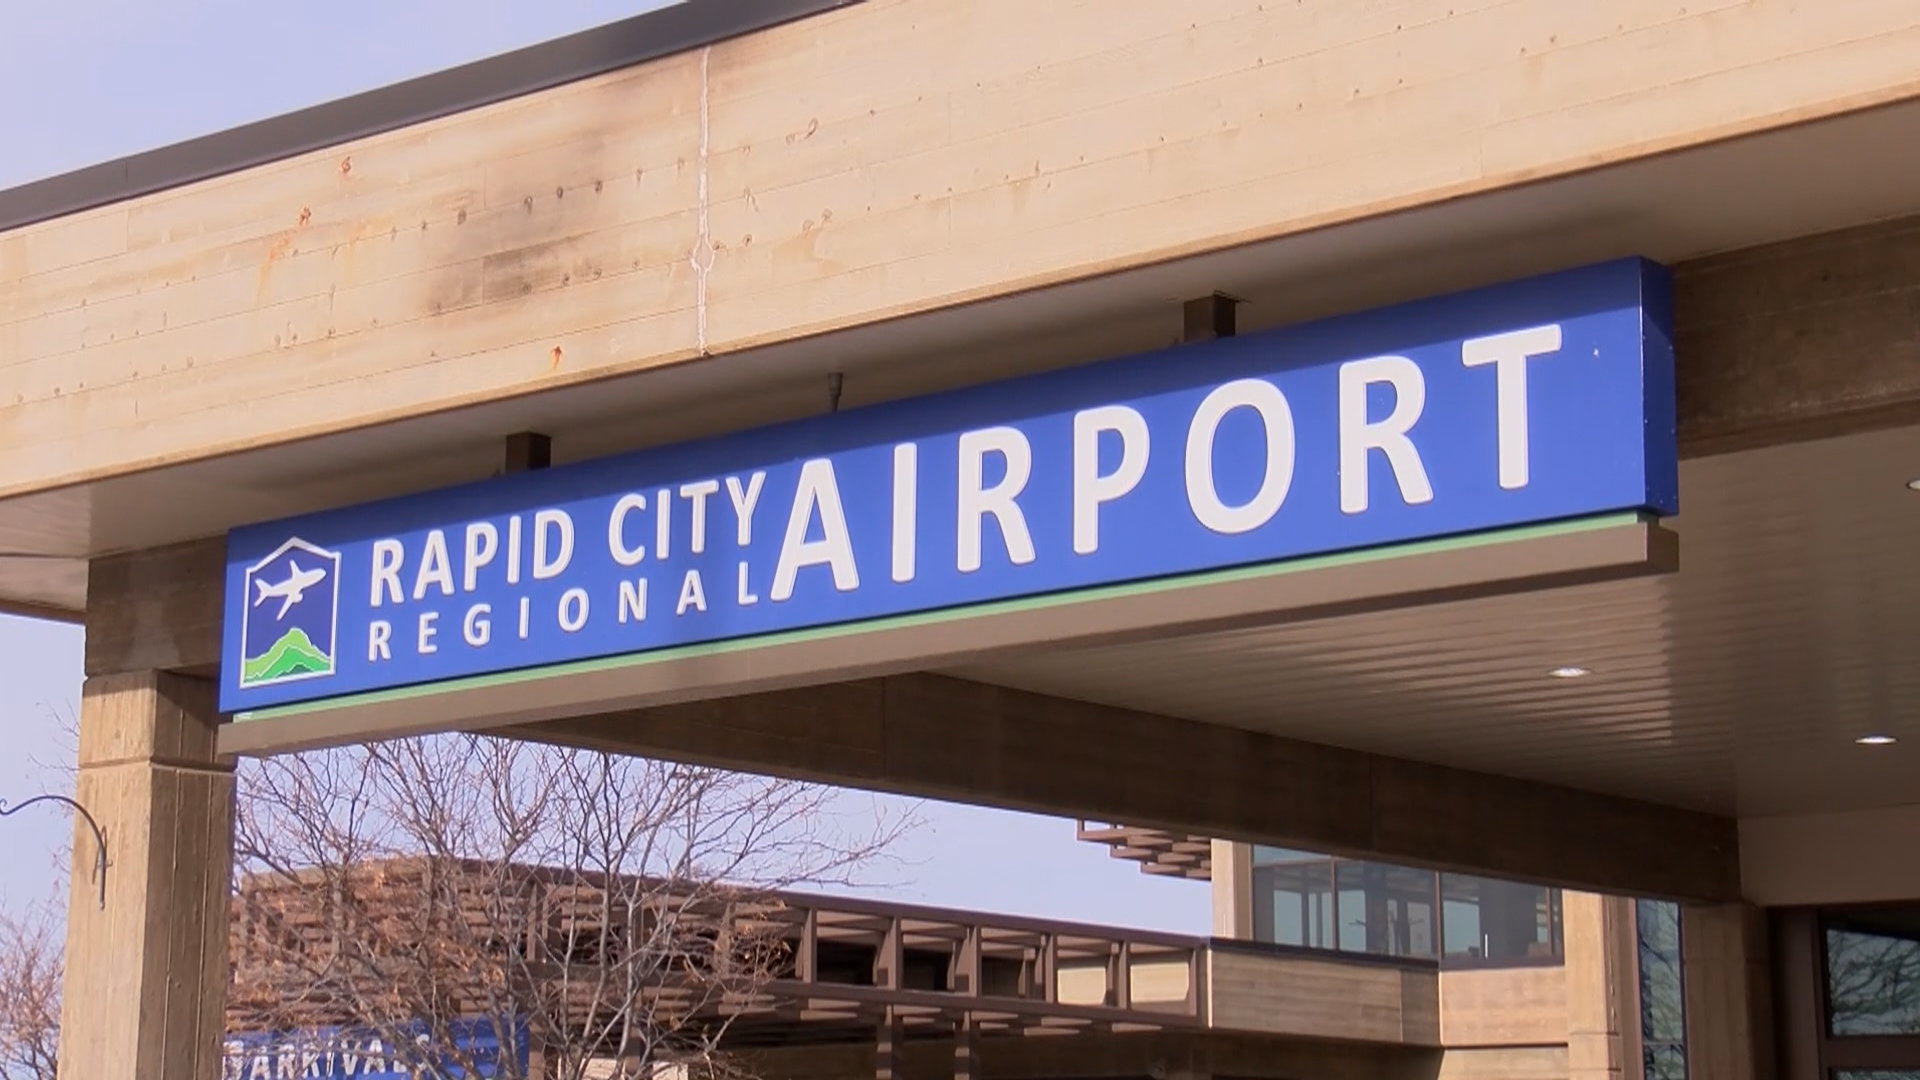 flights from charlotte, nc to rapid city regional airport sd non stop